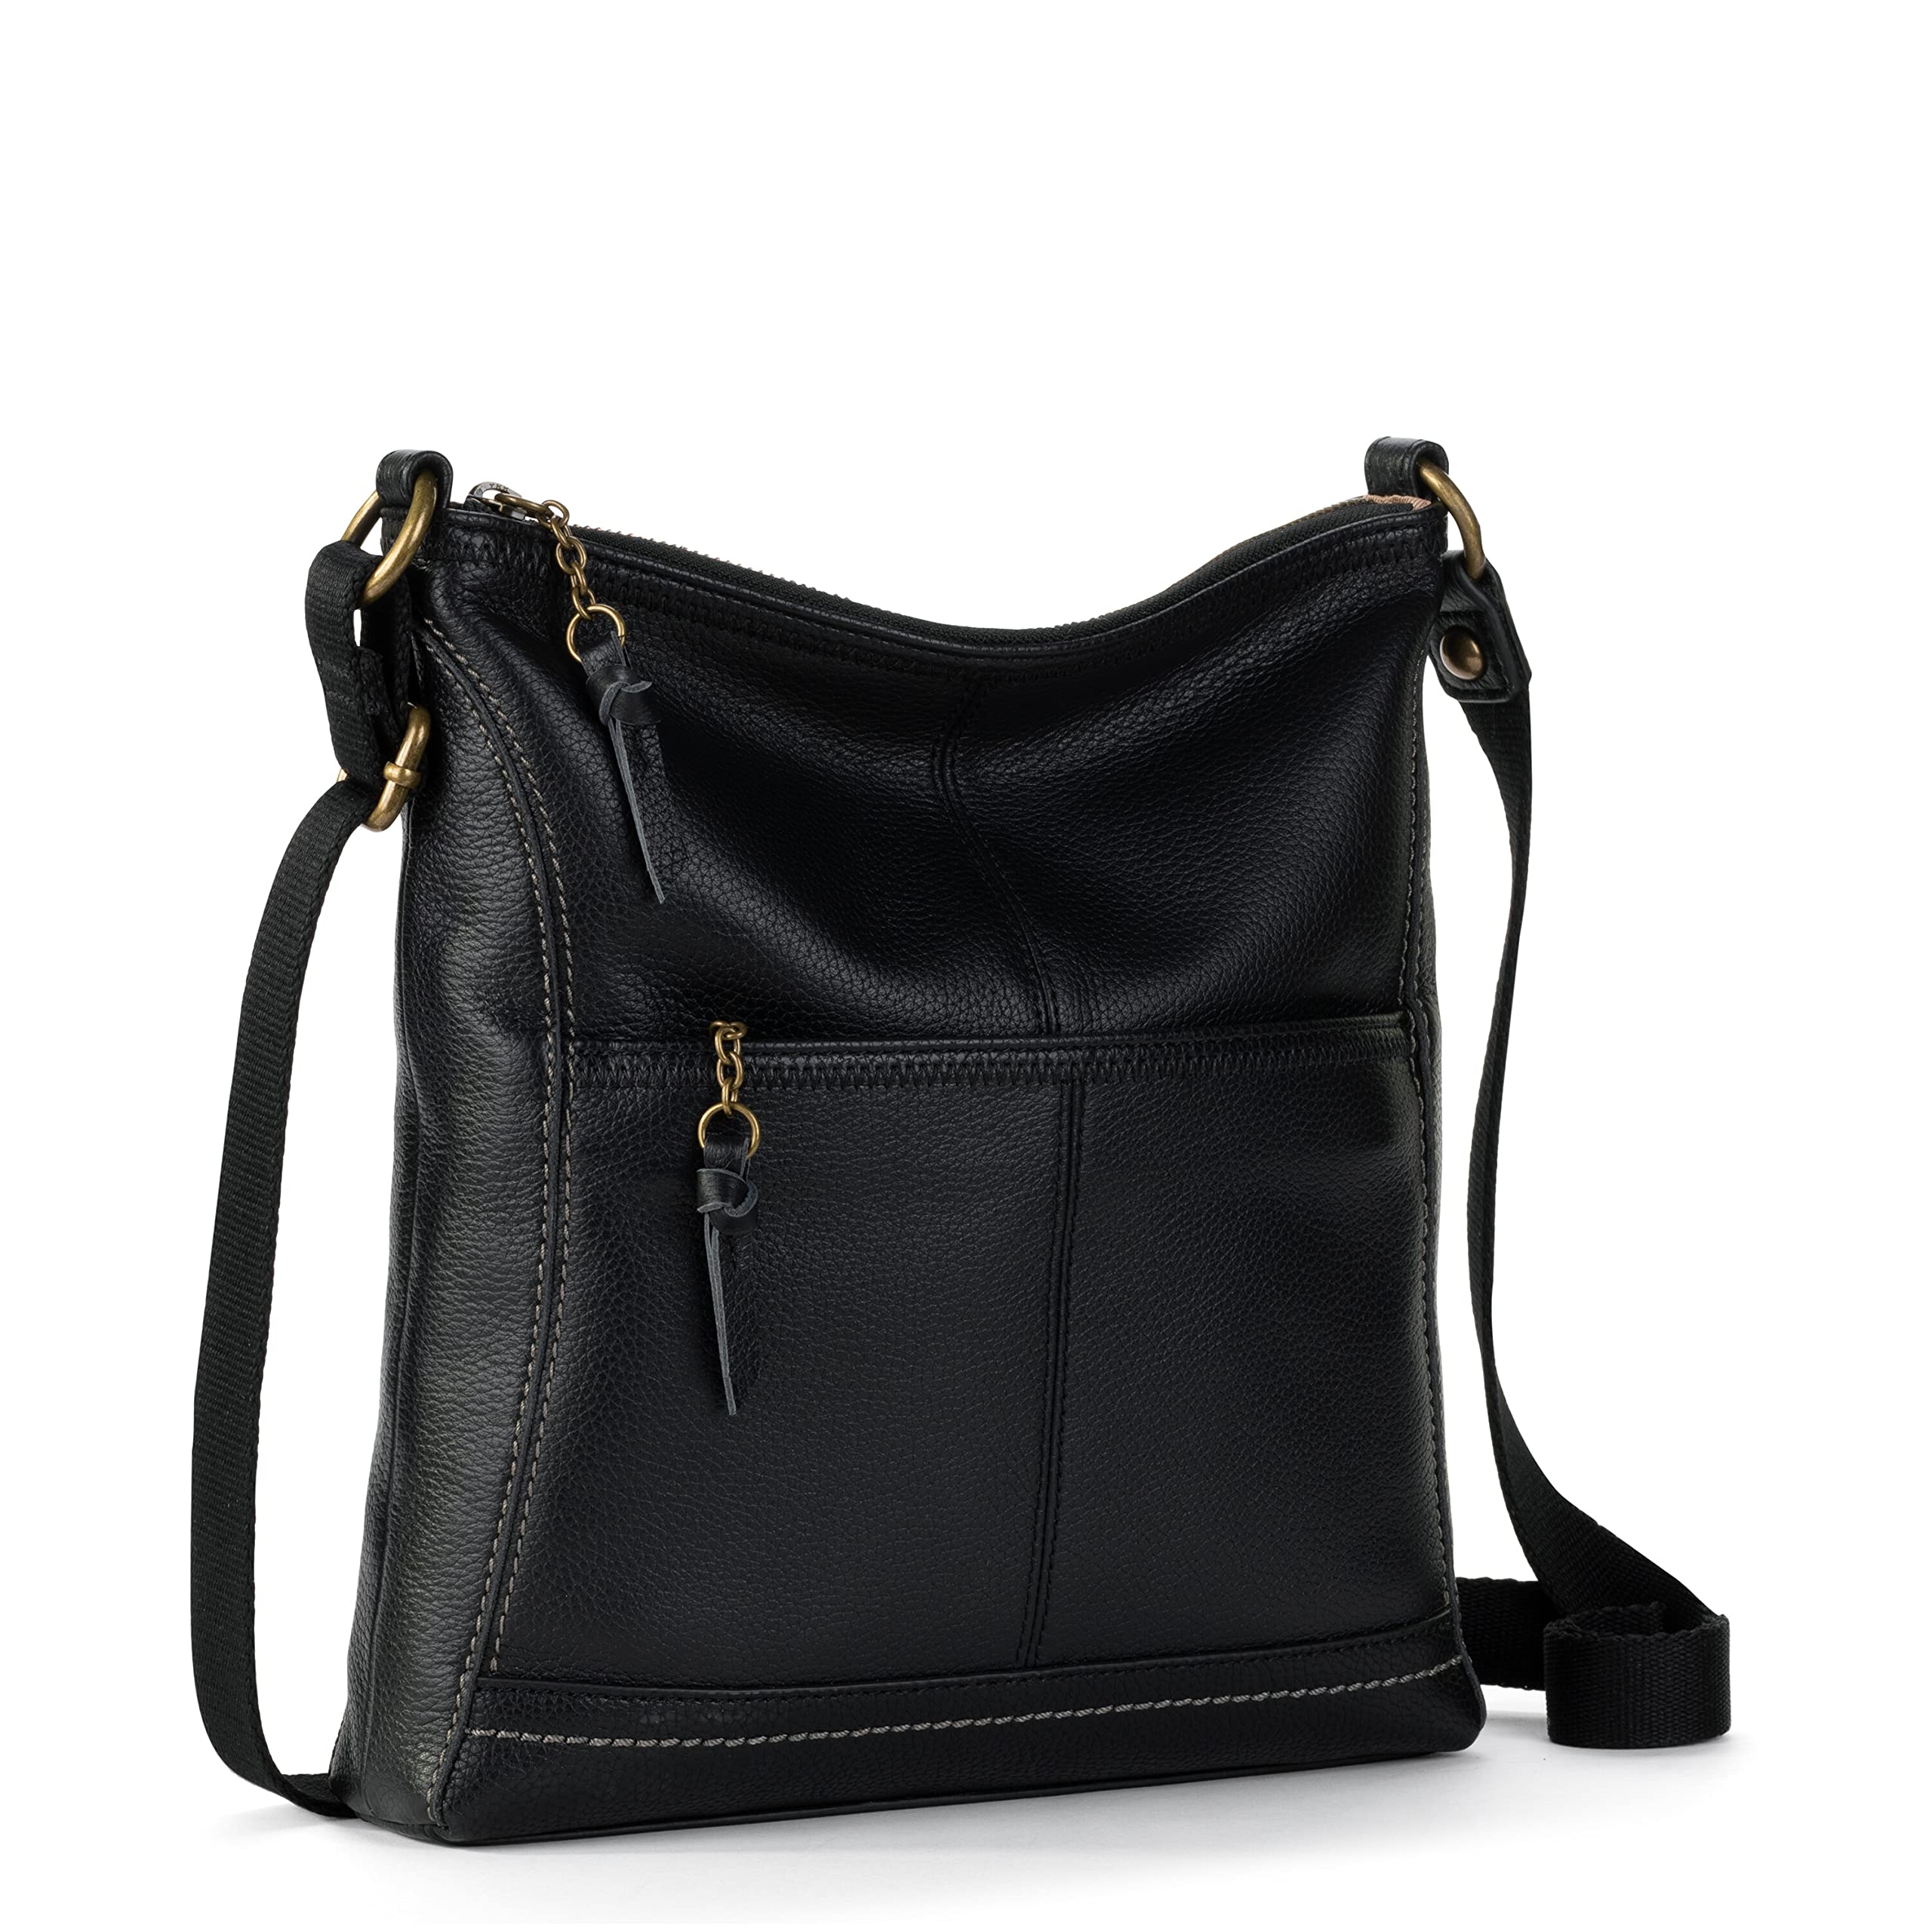 The Sak Womens Iris Crossbody in Leather Casual Purse With Adjustable Strap Zipper Pockets, Black, One Size US